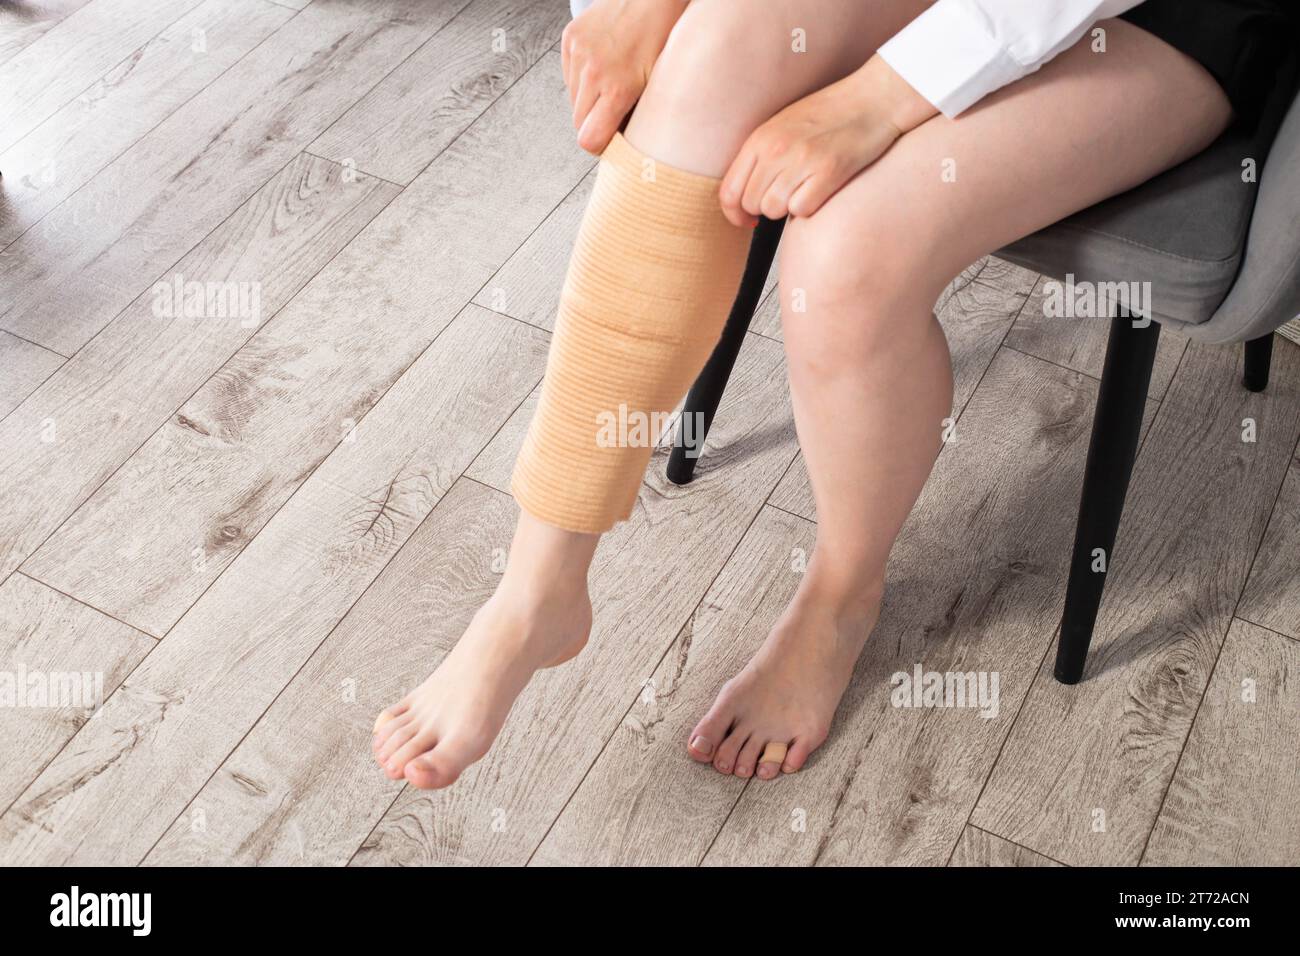 https://c8.alamy.com/comp/2T72ACN/orthopedic-medical-kneecap-on-the-leg-of-a-girl-fixation-and-support-of-the-knee-joint-after-injury-close-up-2T72ACN.jpg